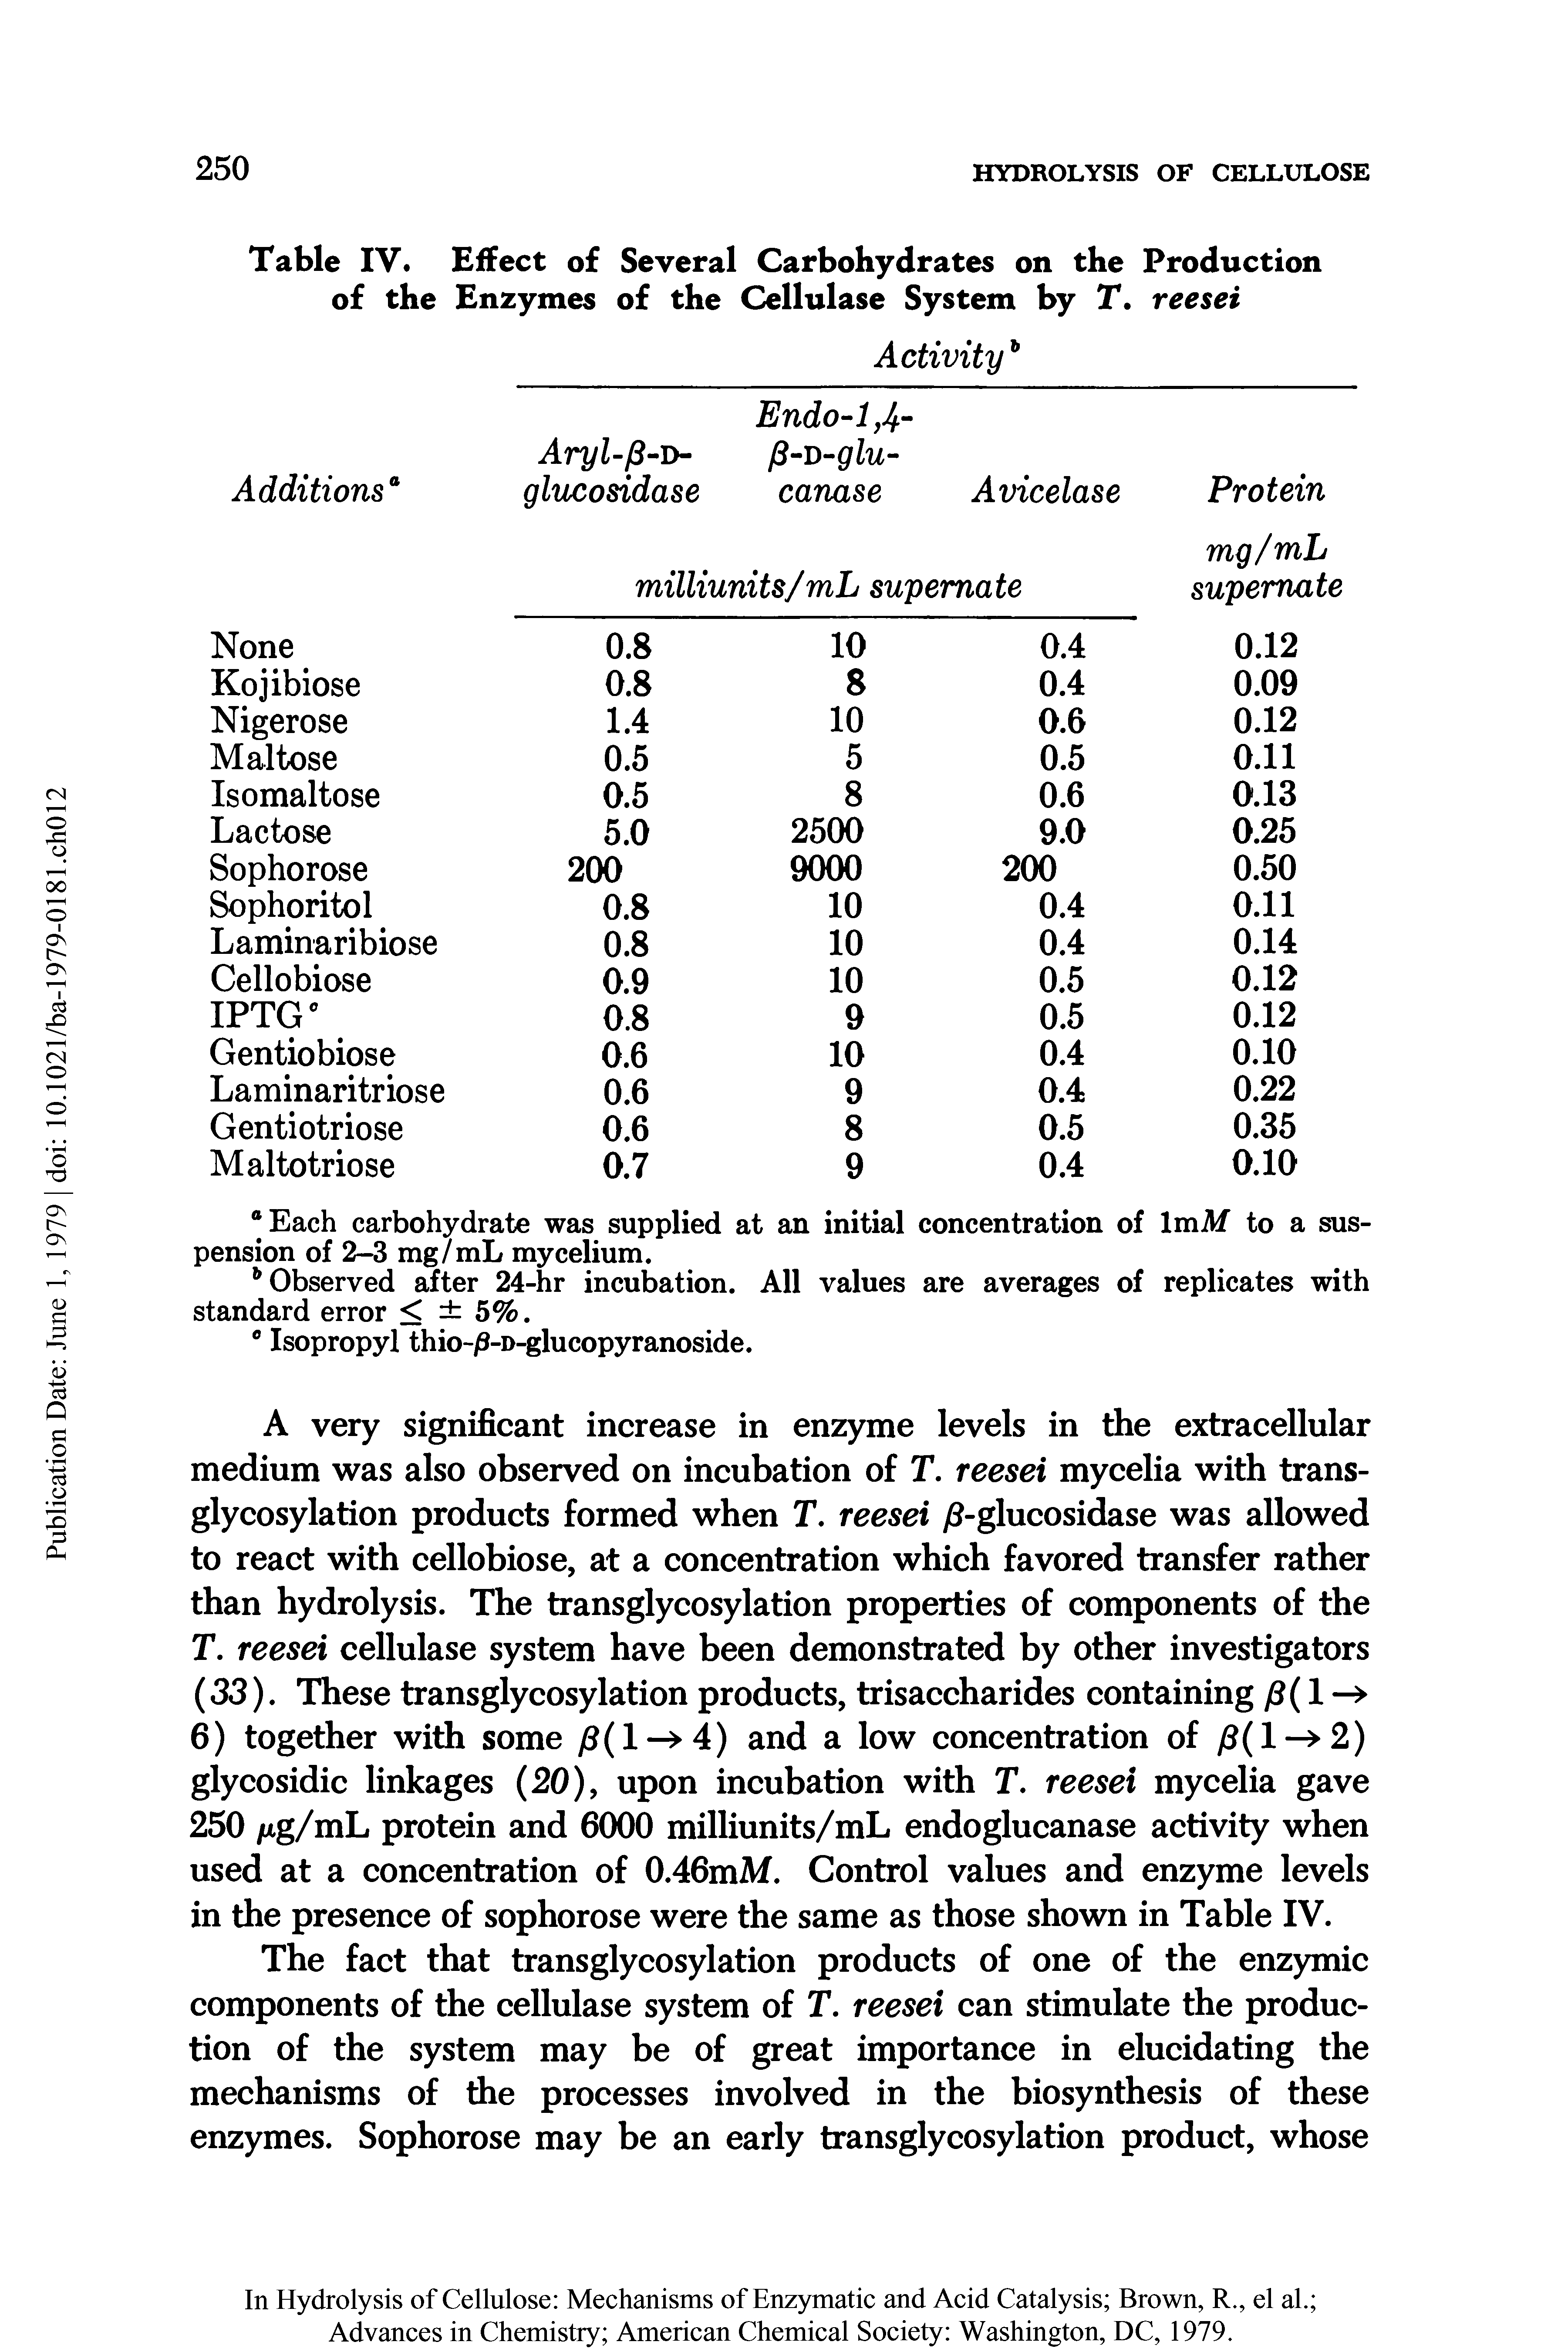 Table IV. Effect of Several Carbohydrates on the Production of the Enzymes of the Cellulase System by T. reesei...